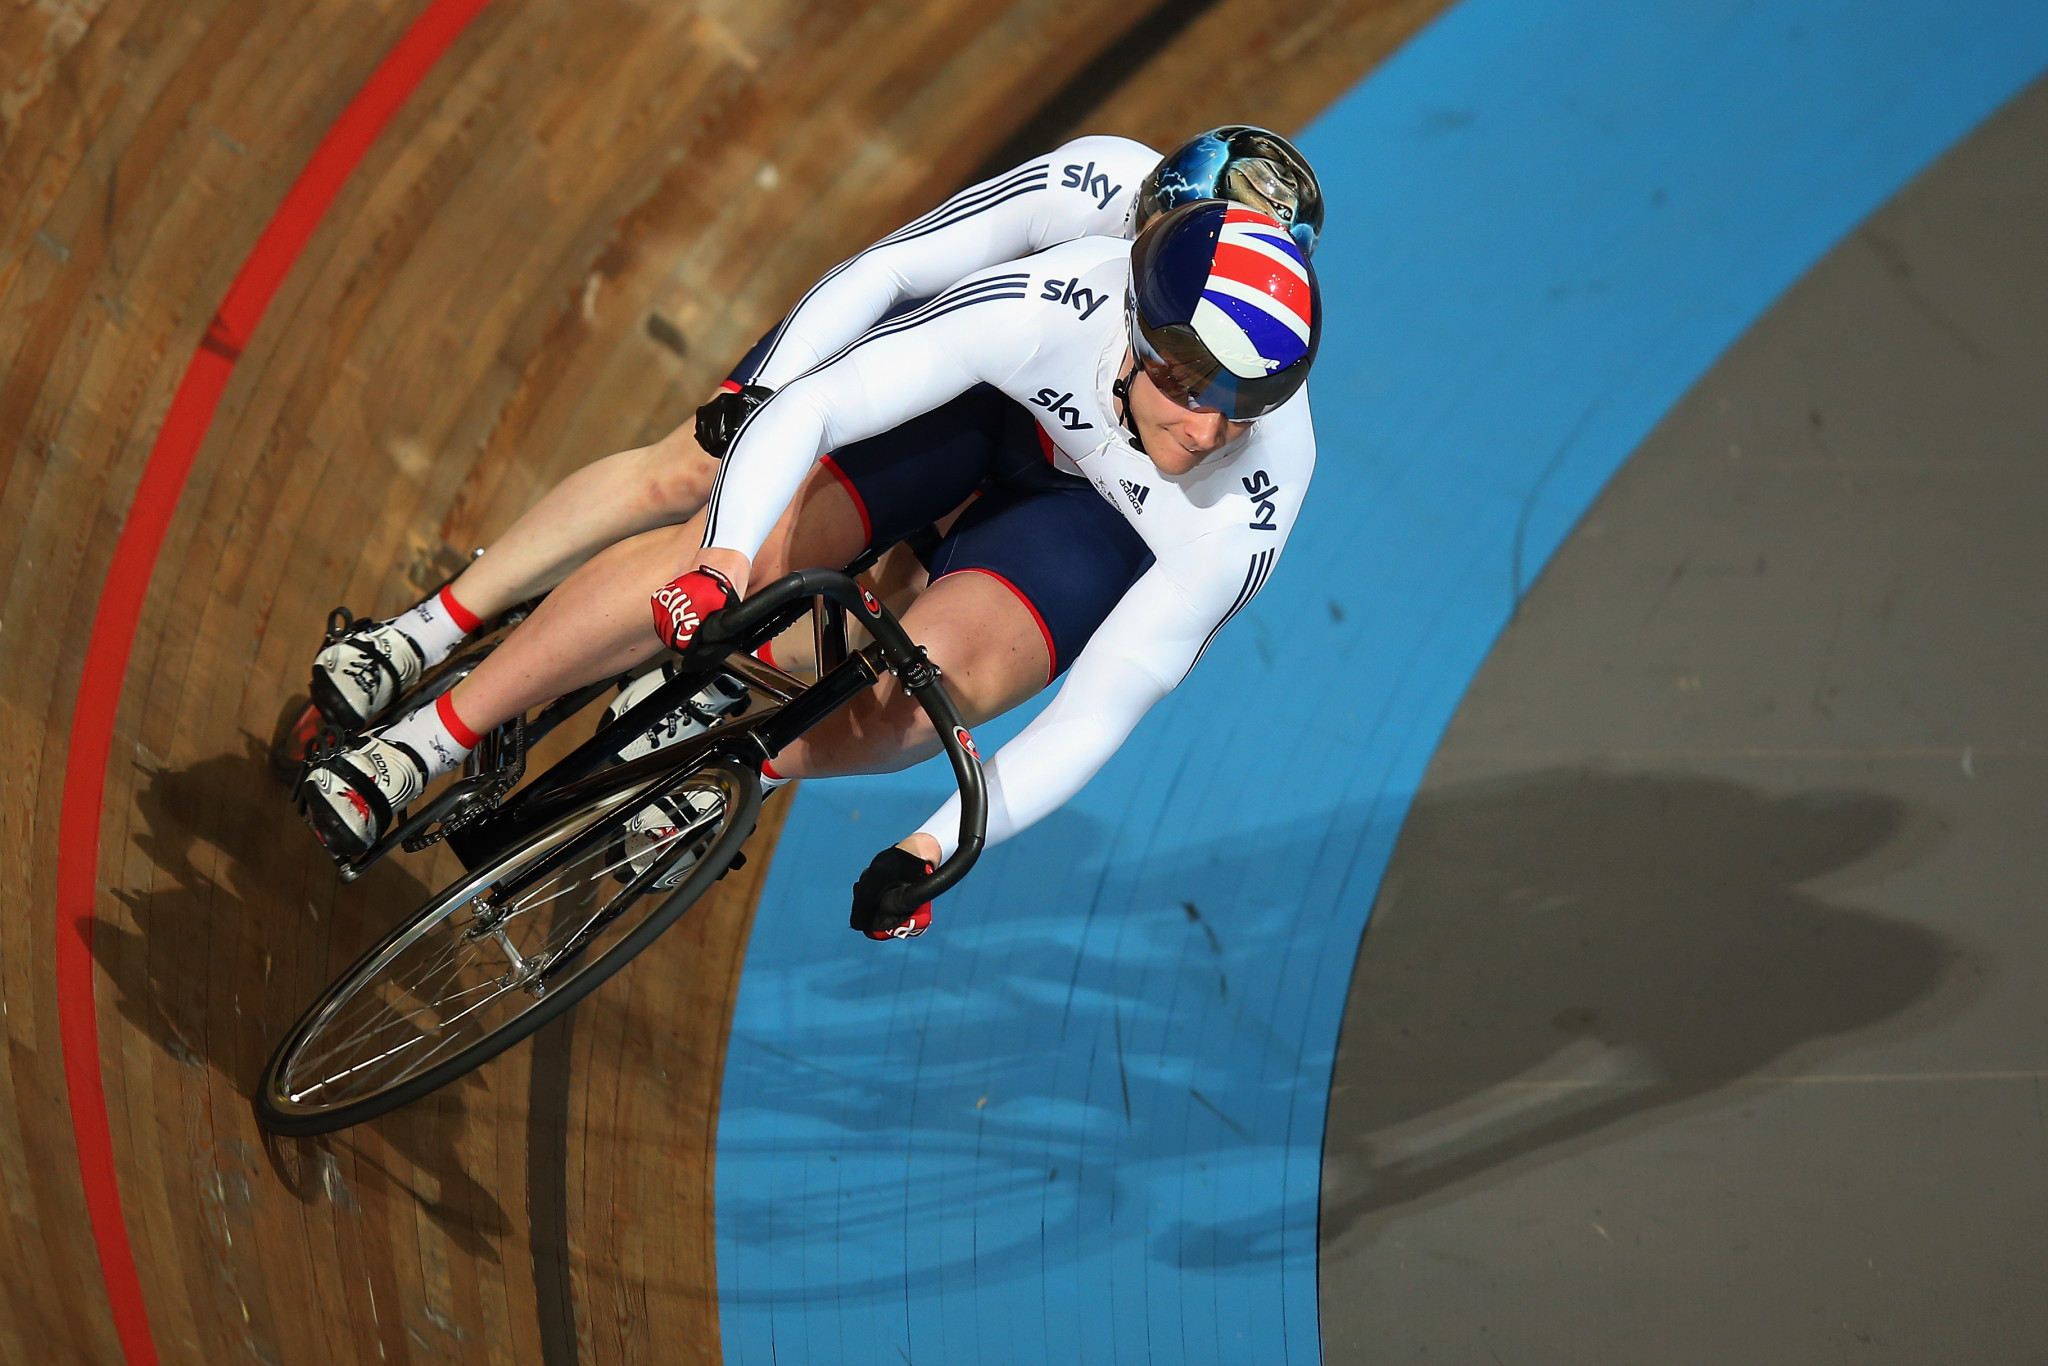 British Cycling announce formation of Rider Representative Commission to aid improvements to athlete welfare